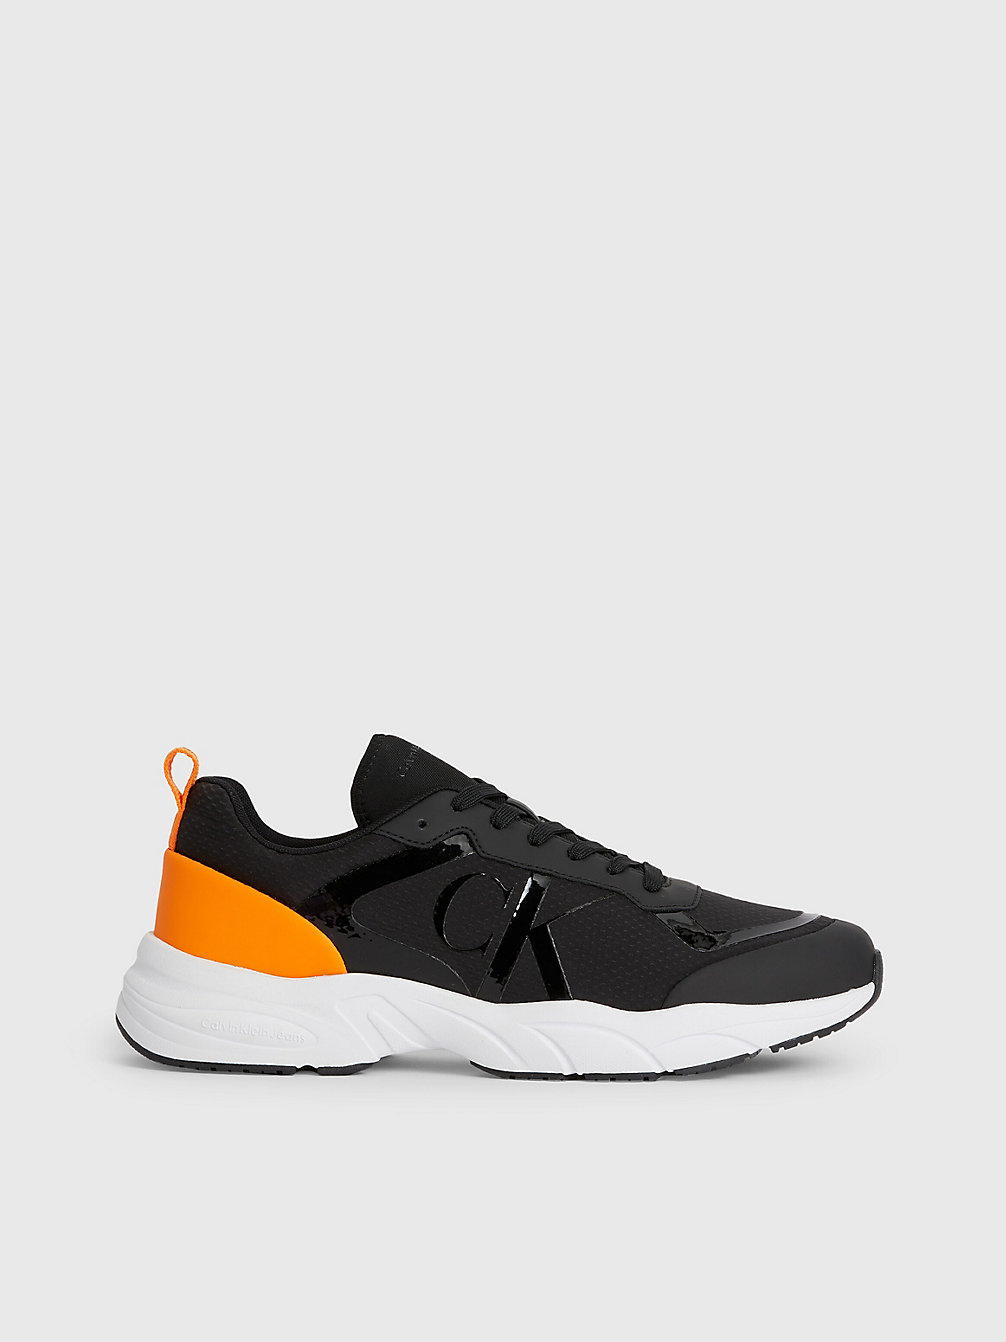 BLACK Recycled Mesh Trainers undefined men Calvin Klein